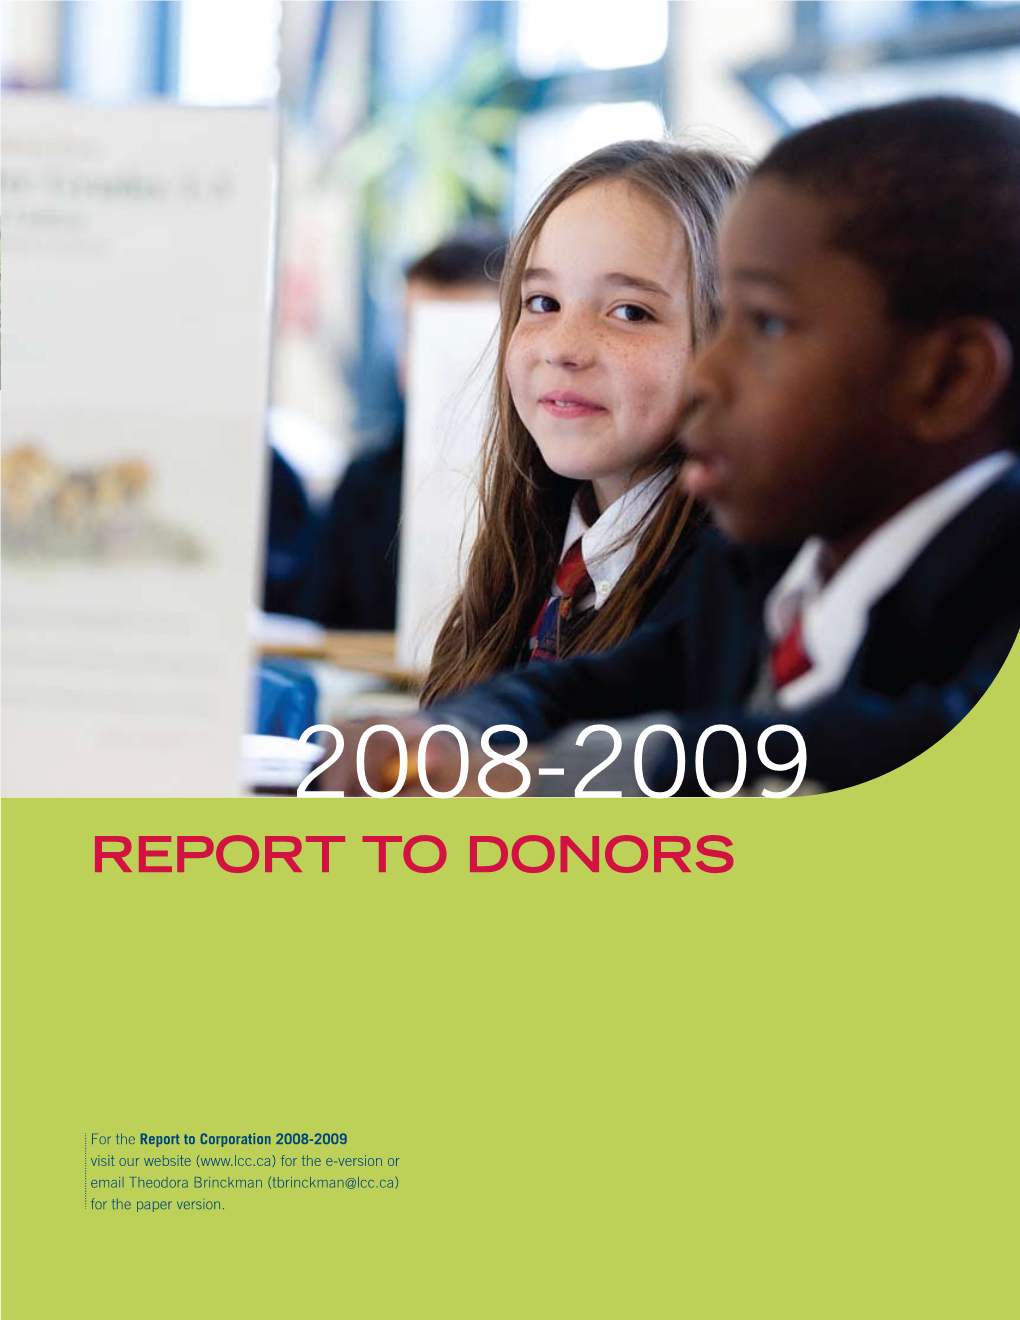 Report to DONORS2008-2009 to Come